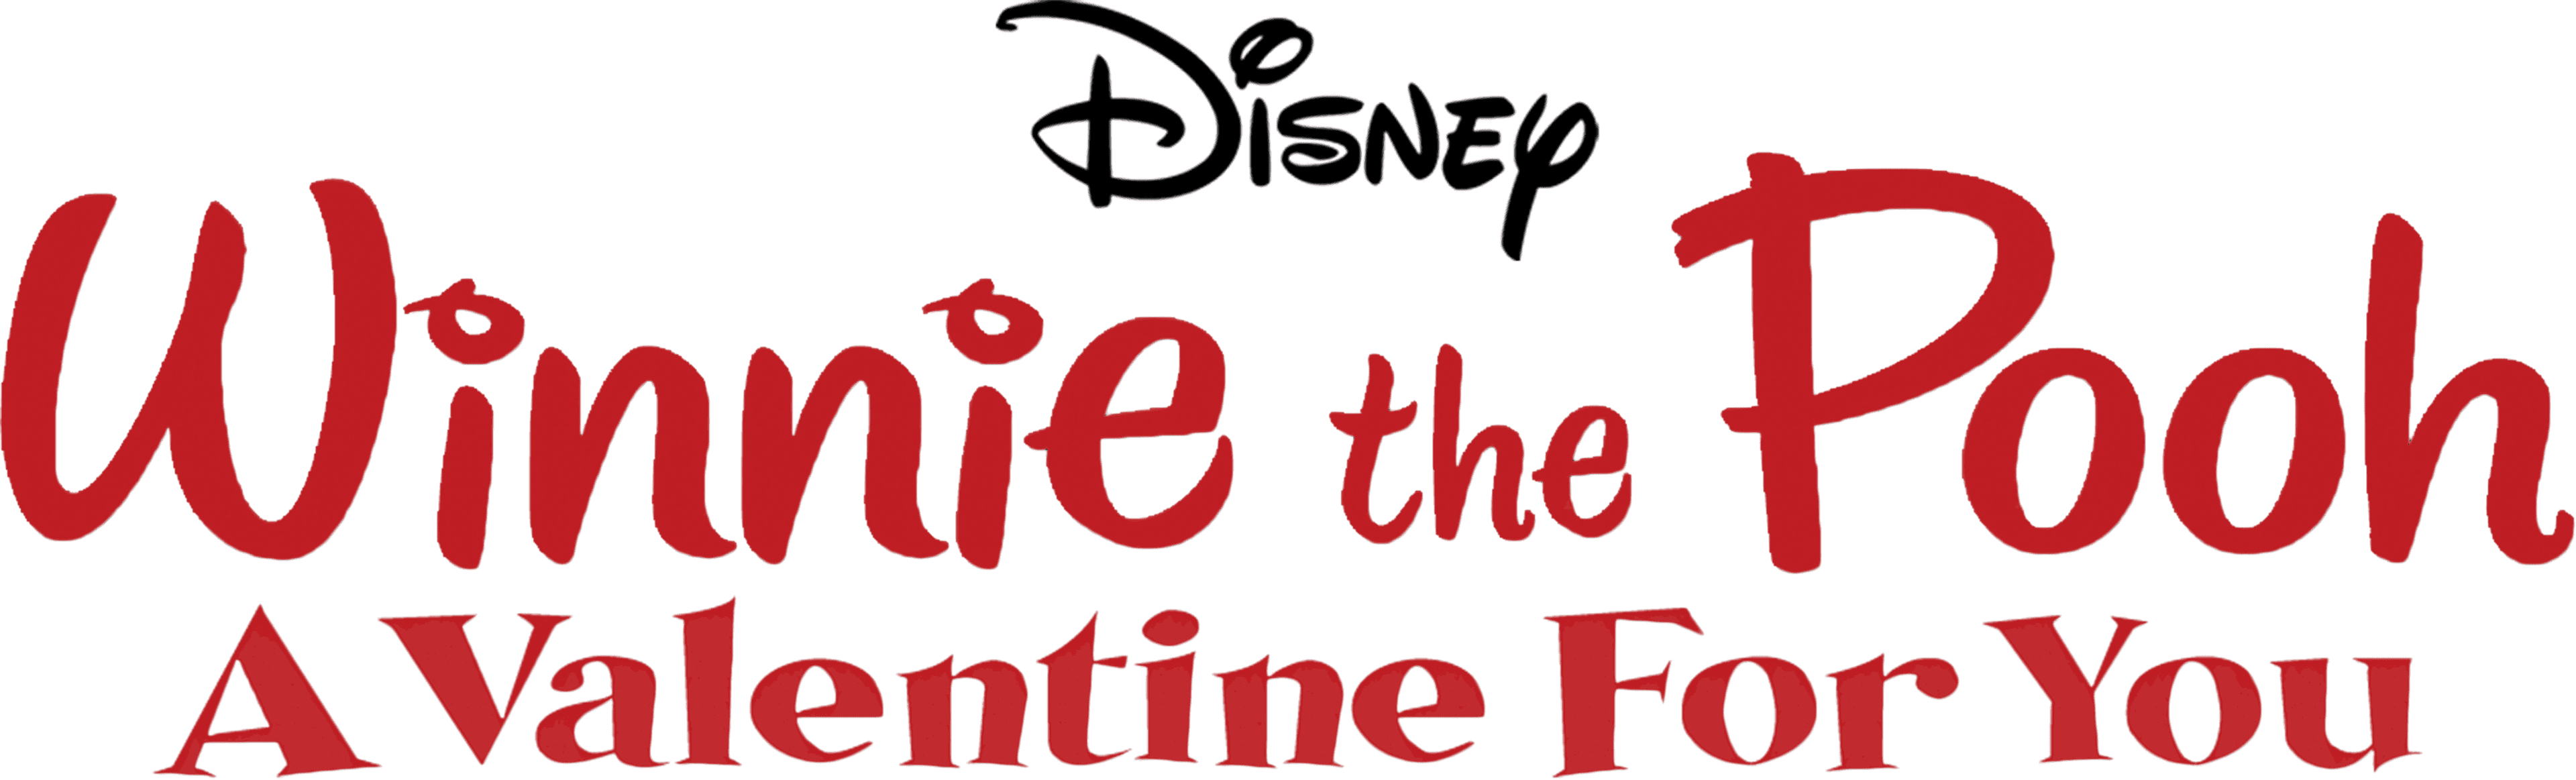 Winnie the Pooh: A Valentine for You logo